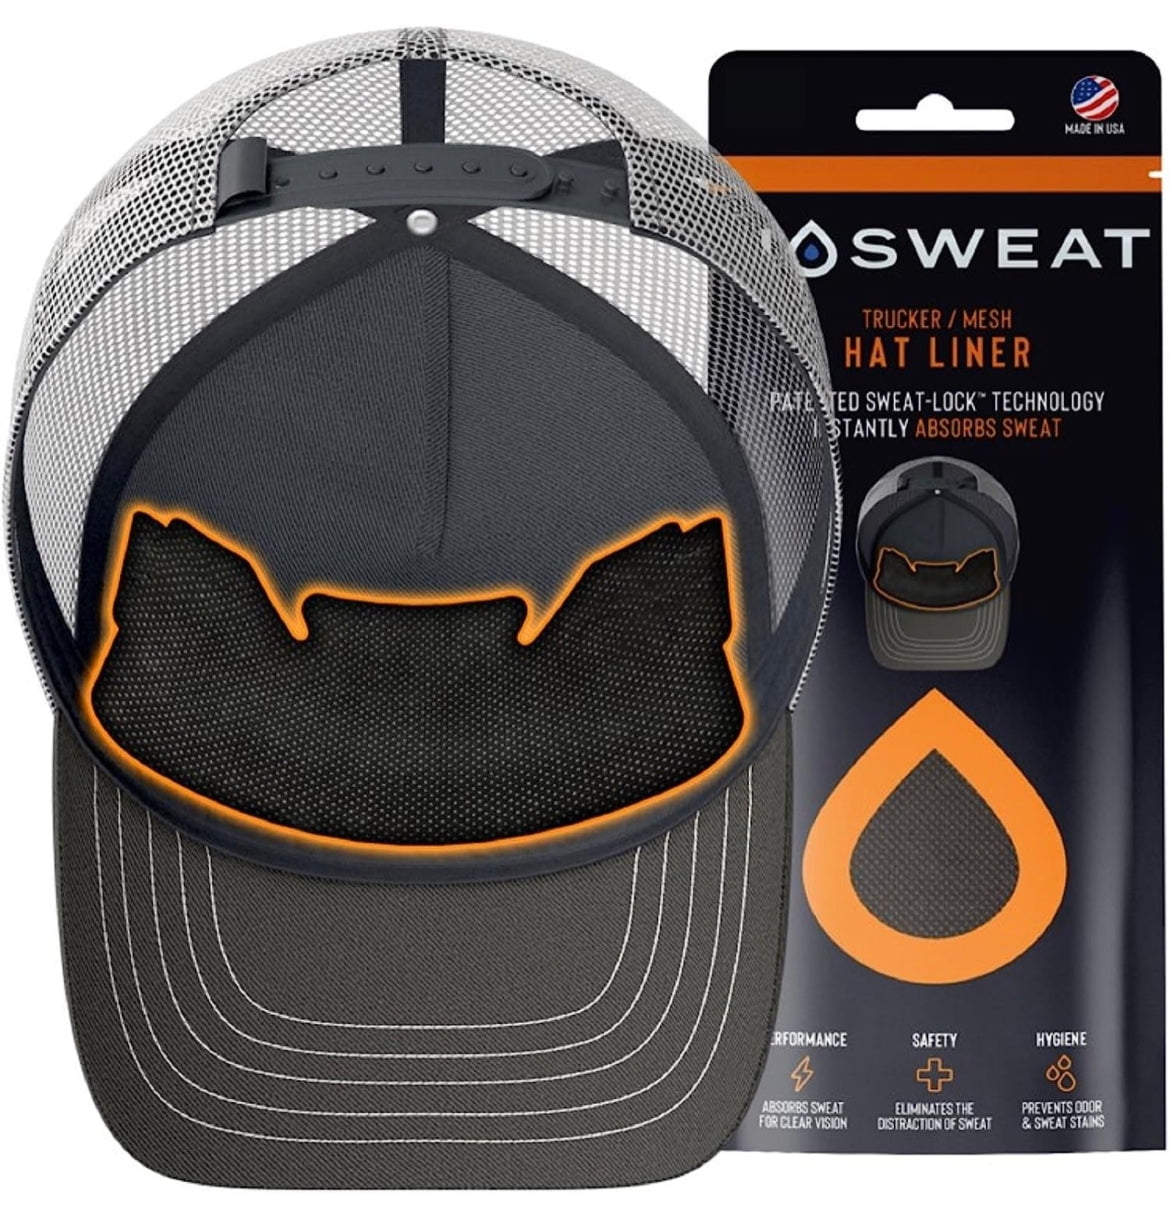 NoSweat Hat Liner 3-Pack